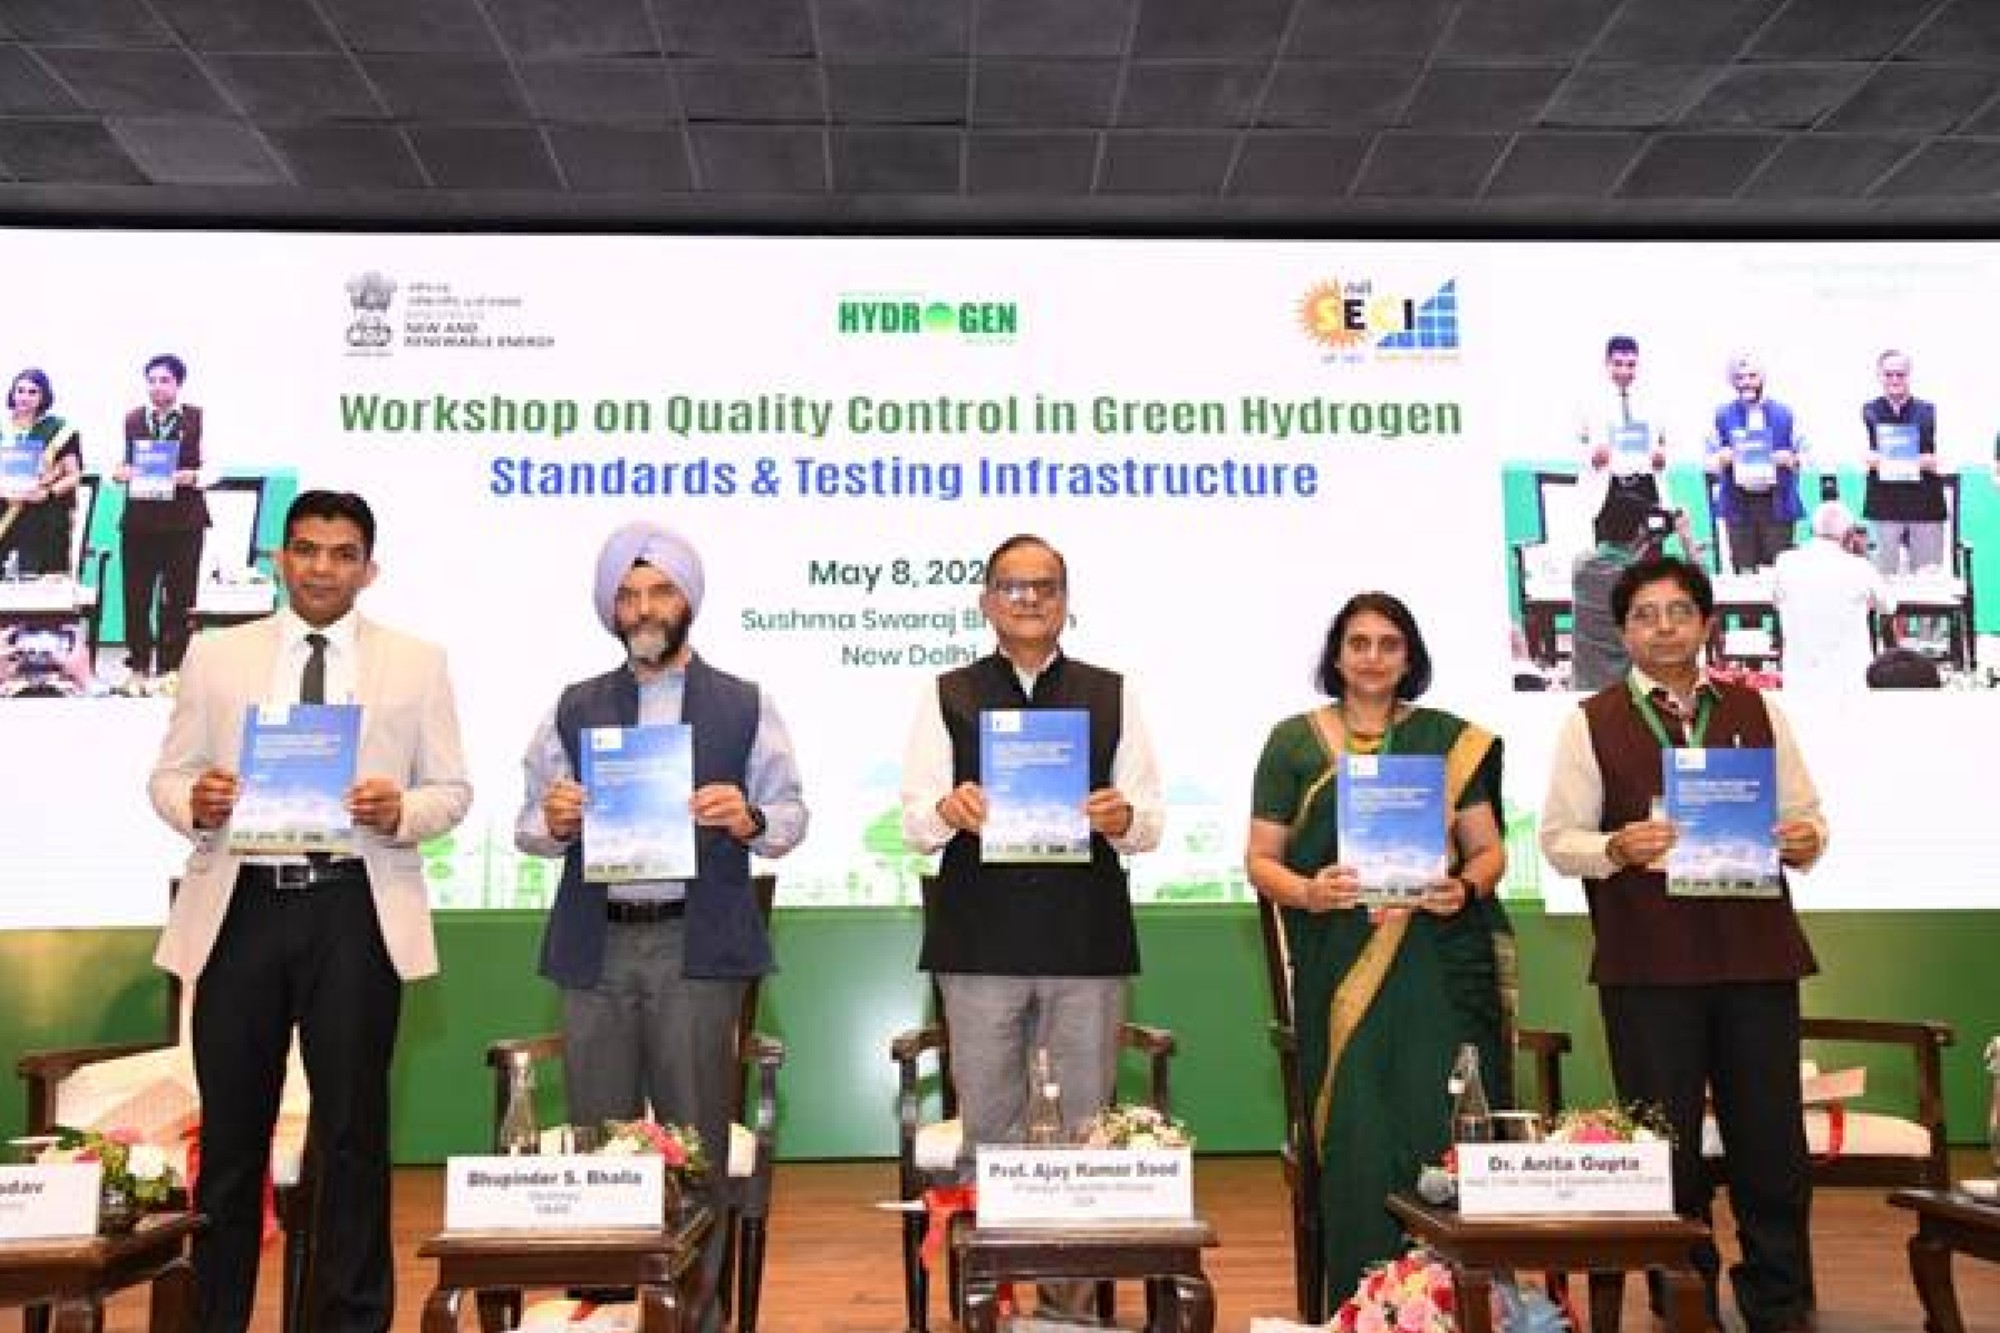 India advances its green hydrogen agenda with a quality control workshop